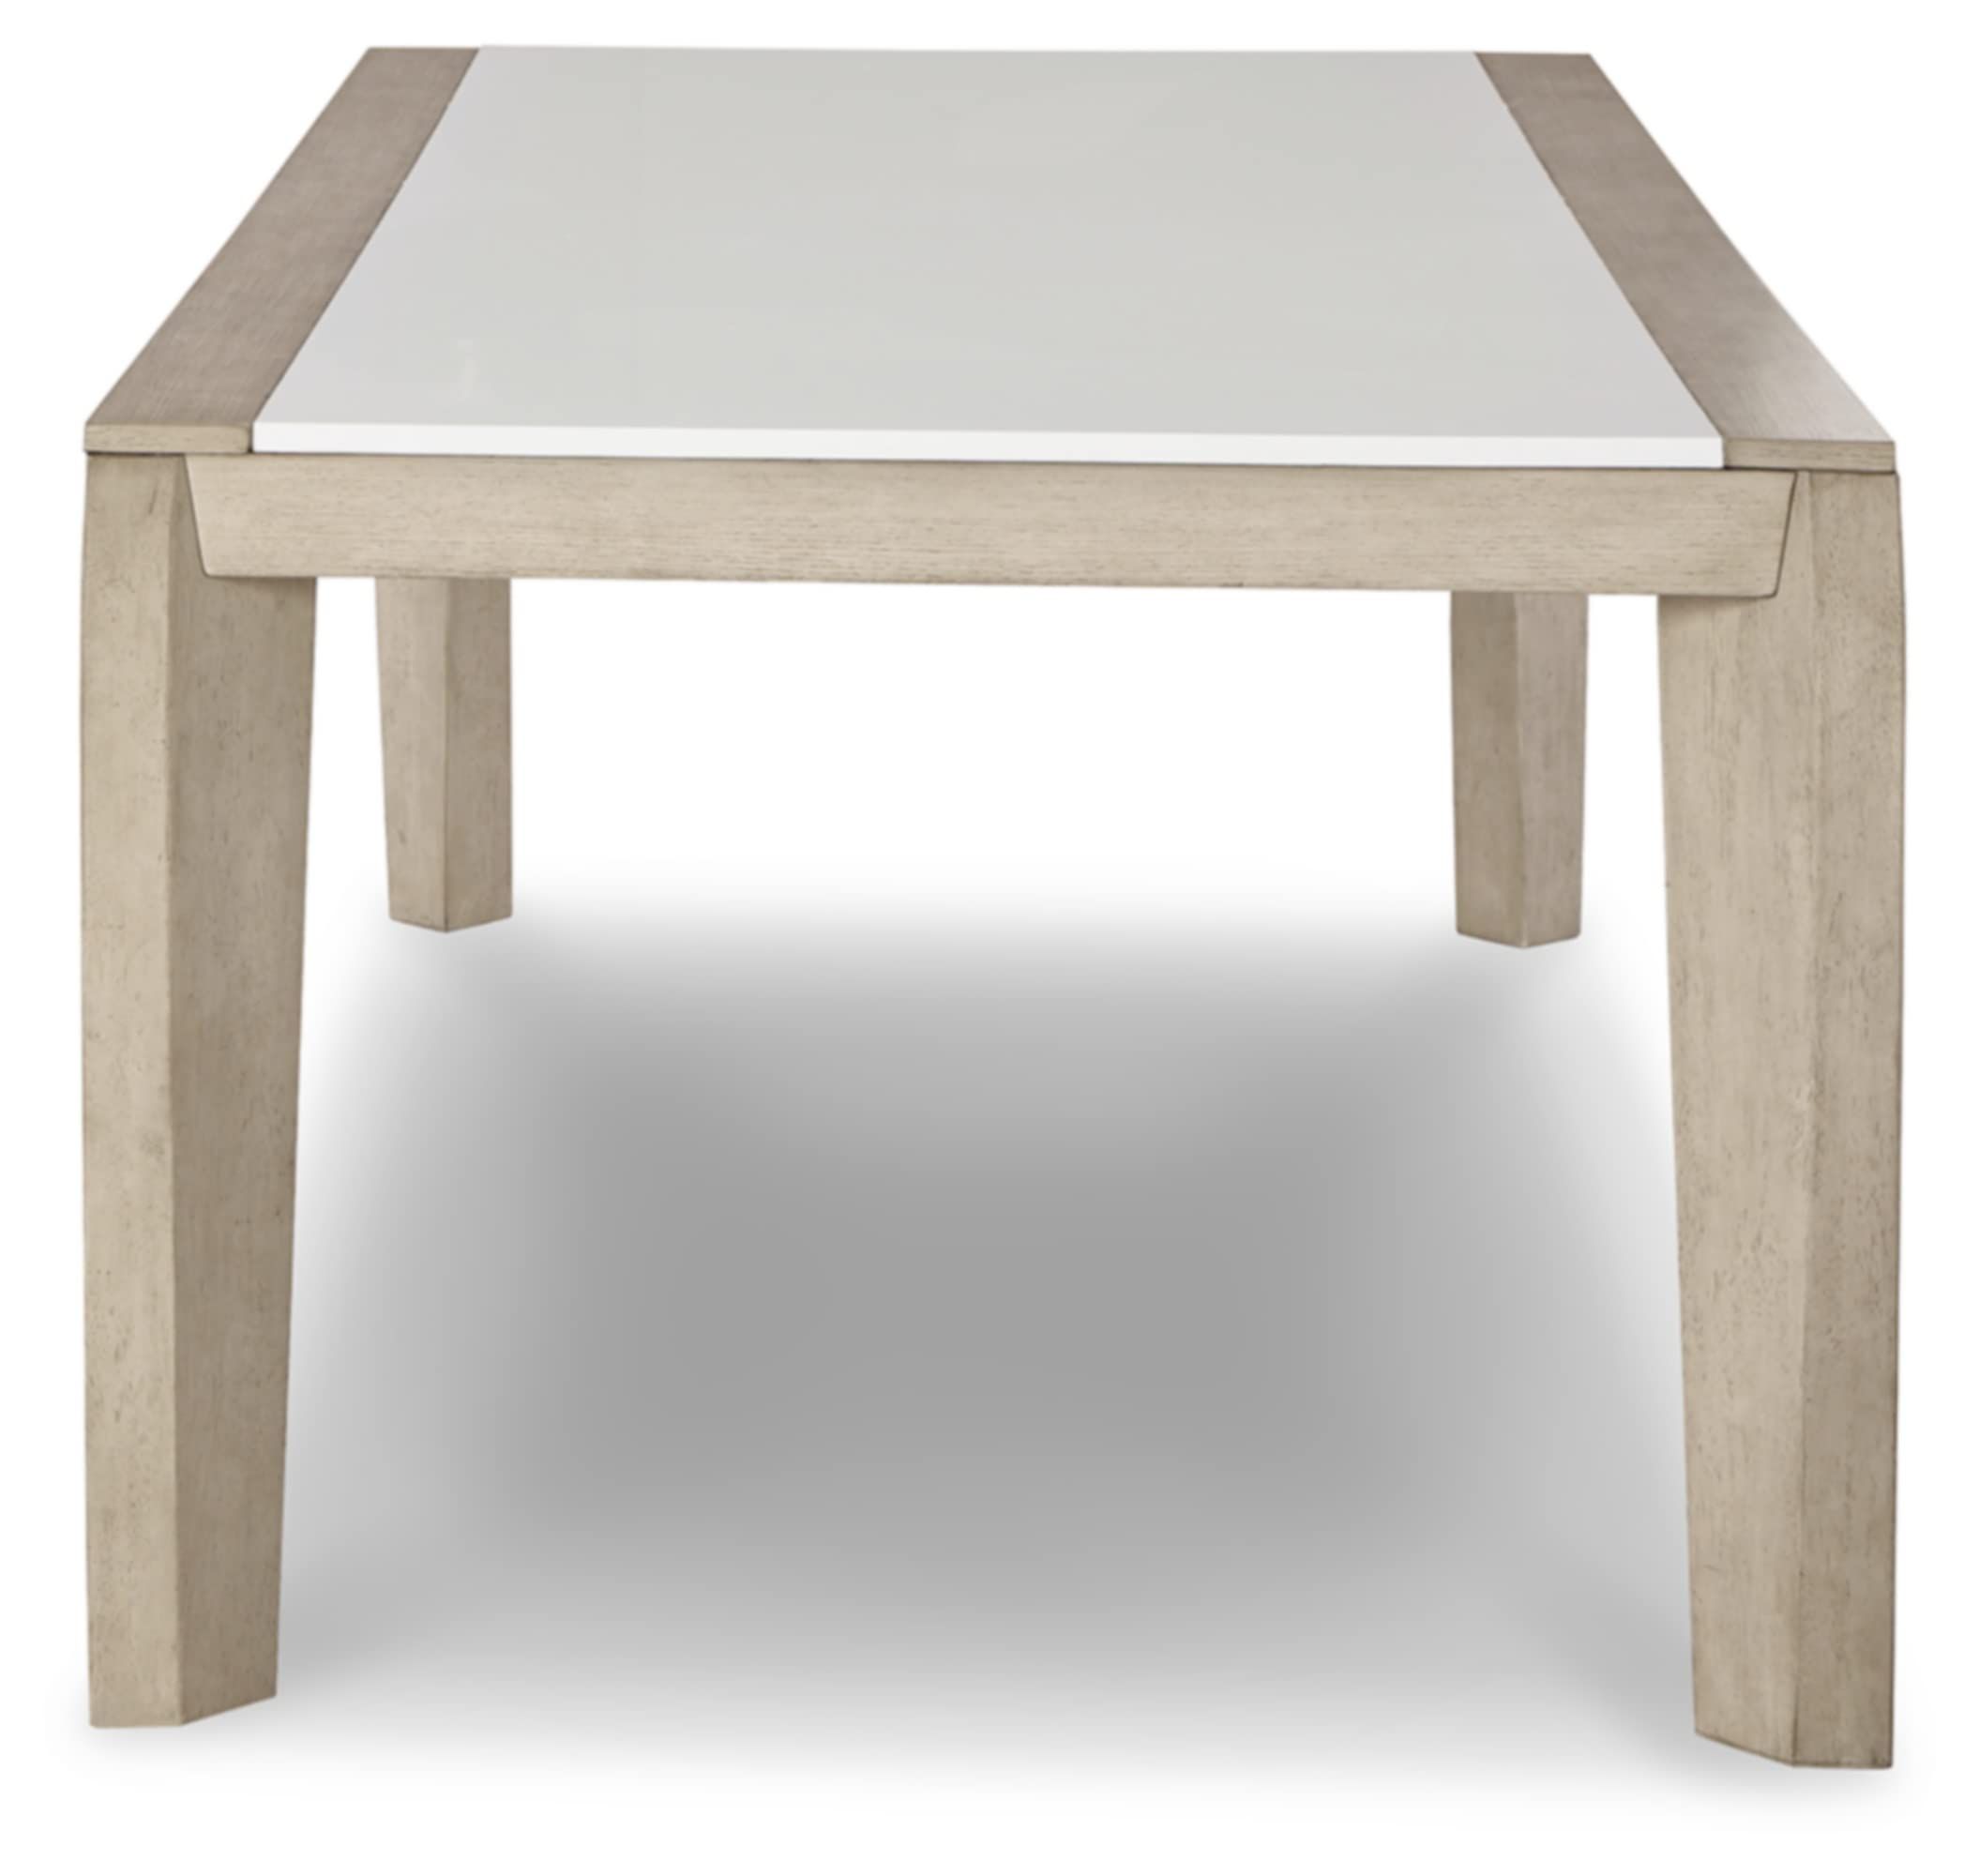 Signature Design by Ashley Wendora Contemporary Dining Table with Acrylic Insert, White & Beige | Amazon (US)